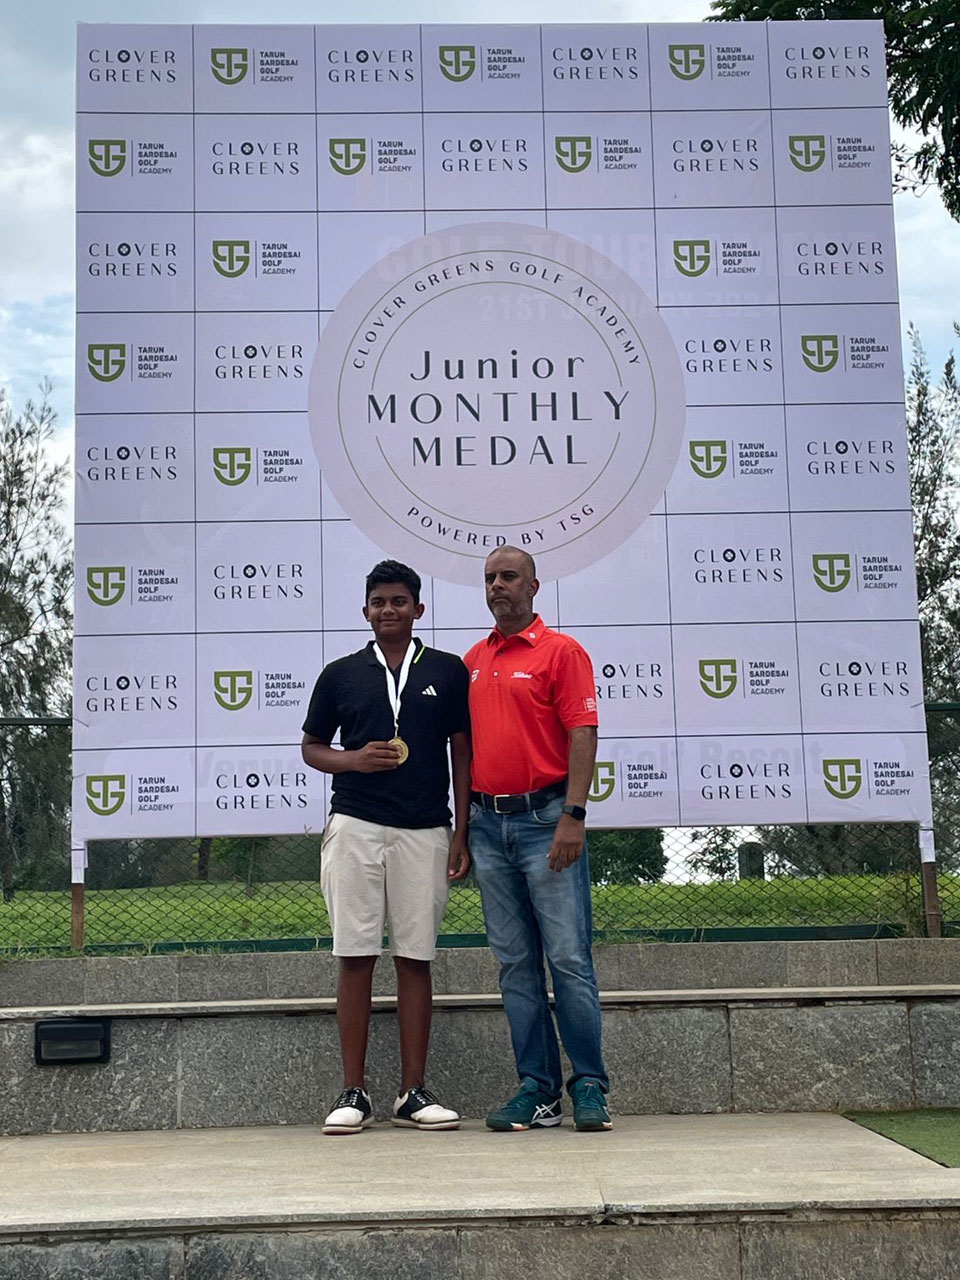 Vivaan Ubhayakar won  the 'B' Boys and the overall Category at the Clover Greens Junior Monthly Medal powered by TSG, held at Clover Greens Golf Course in Bangalore.